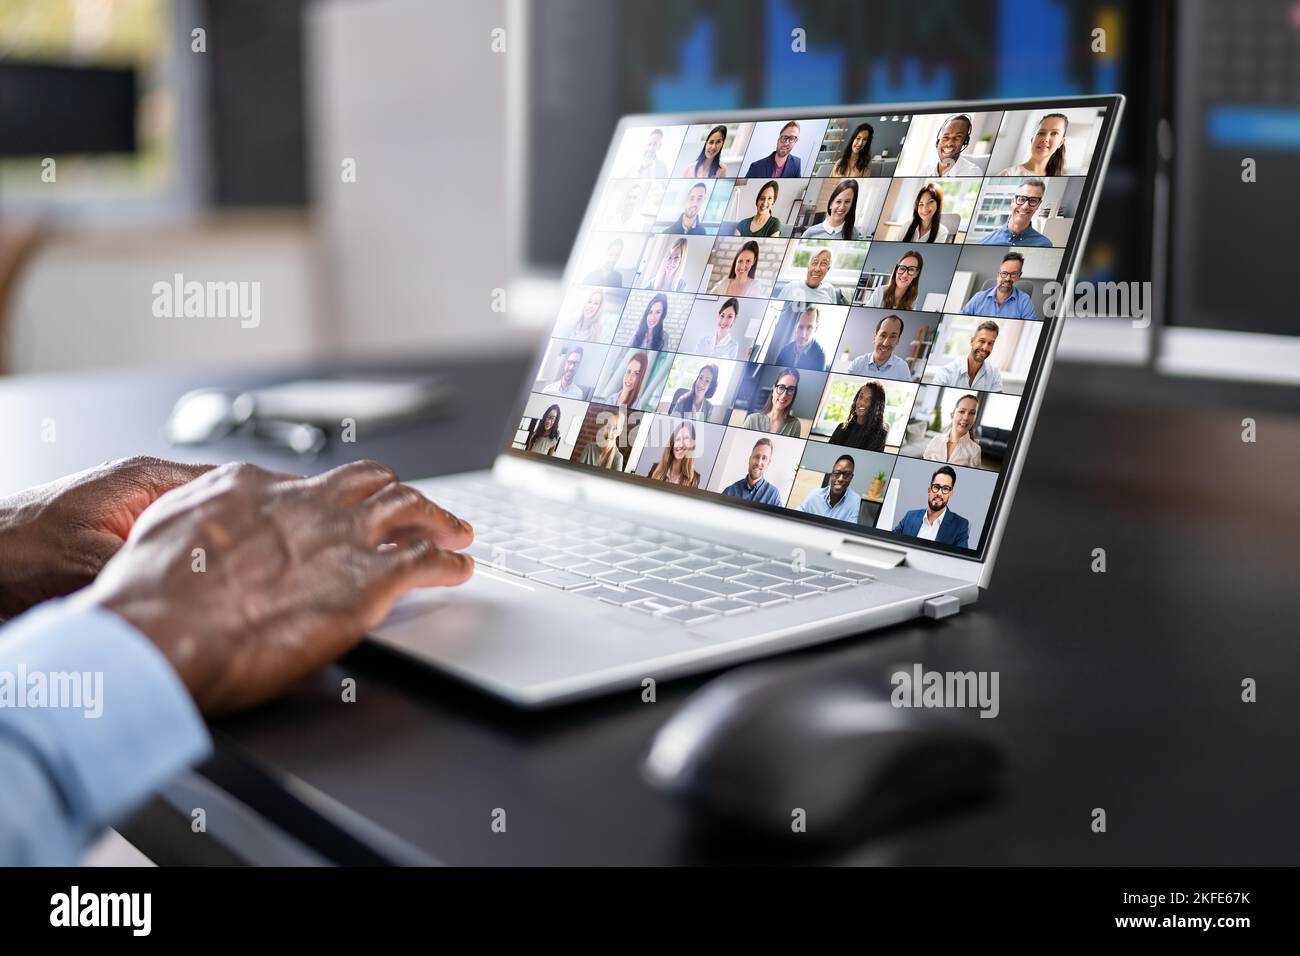 Online Video Conference Webinar On Laptop Computer Stock Photo